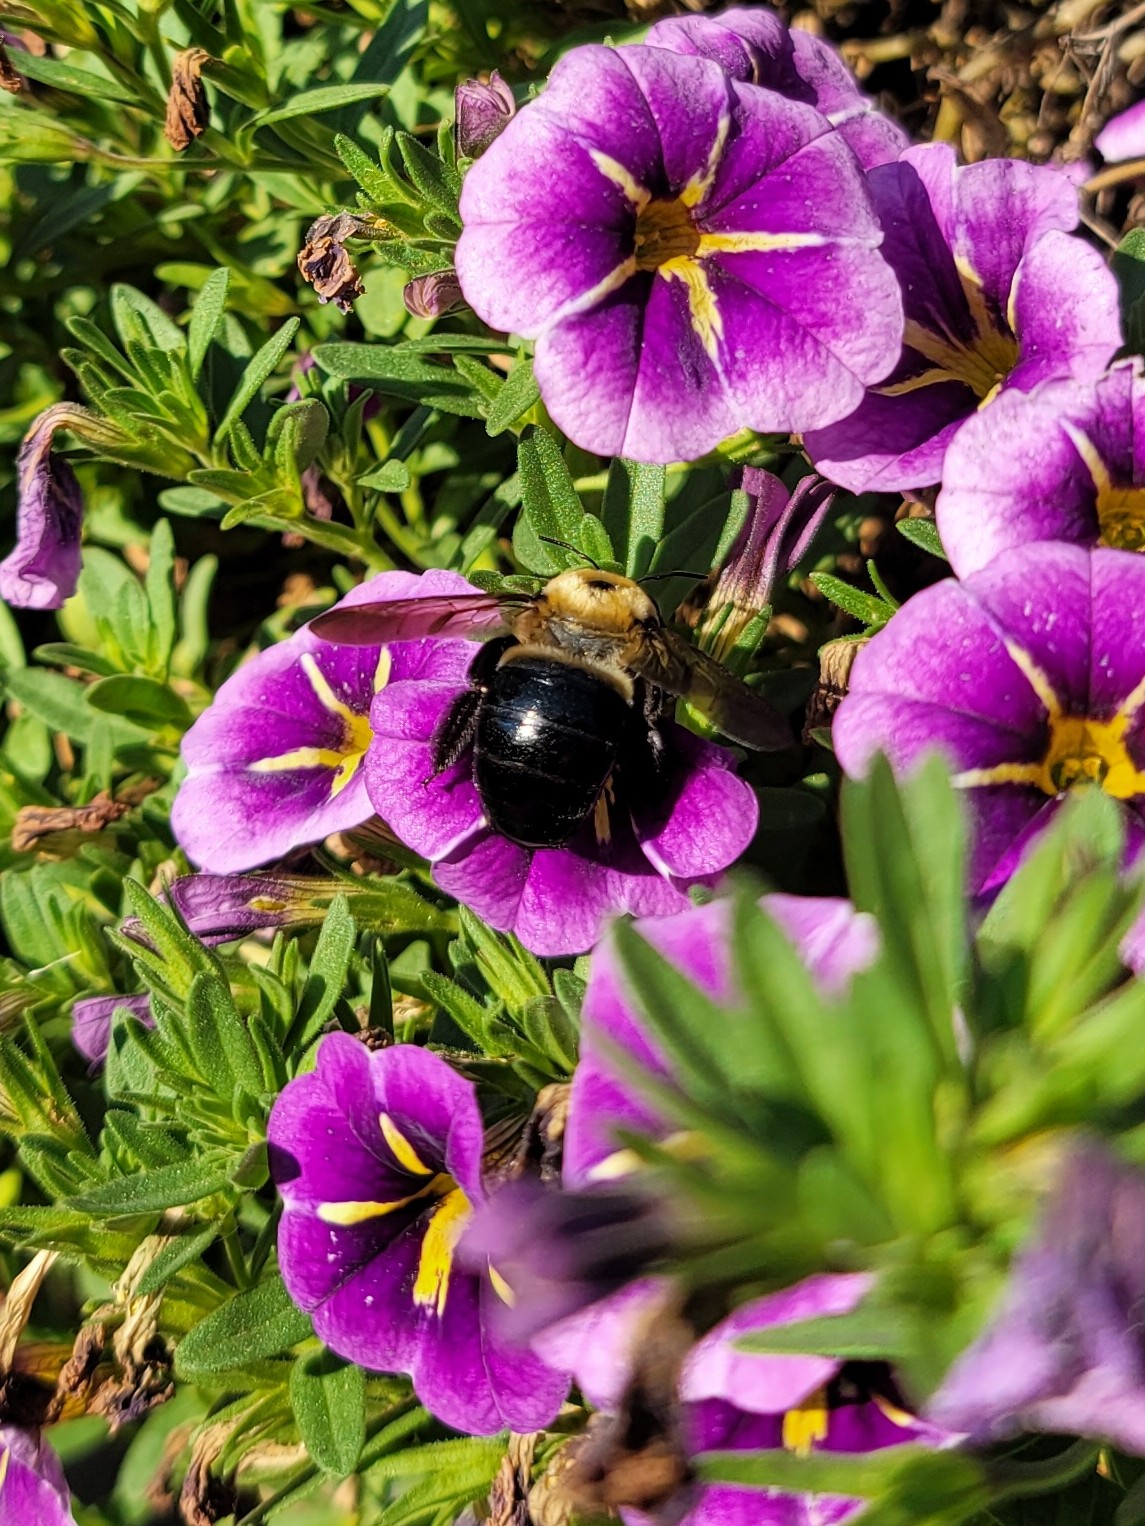 Large, shiny black and yellow carpenter bee on purple flowers